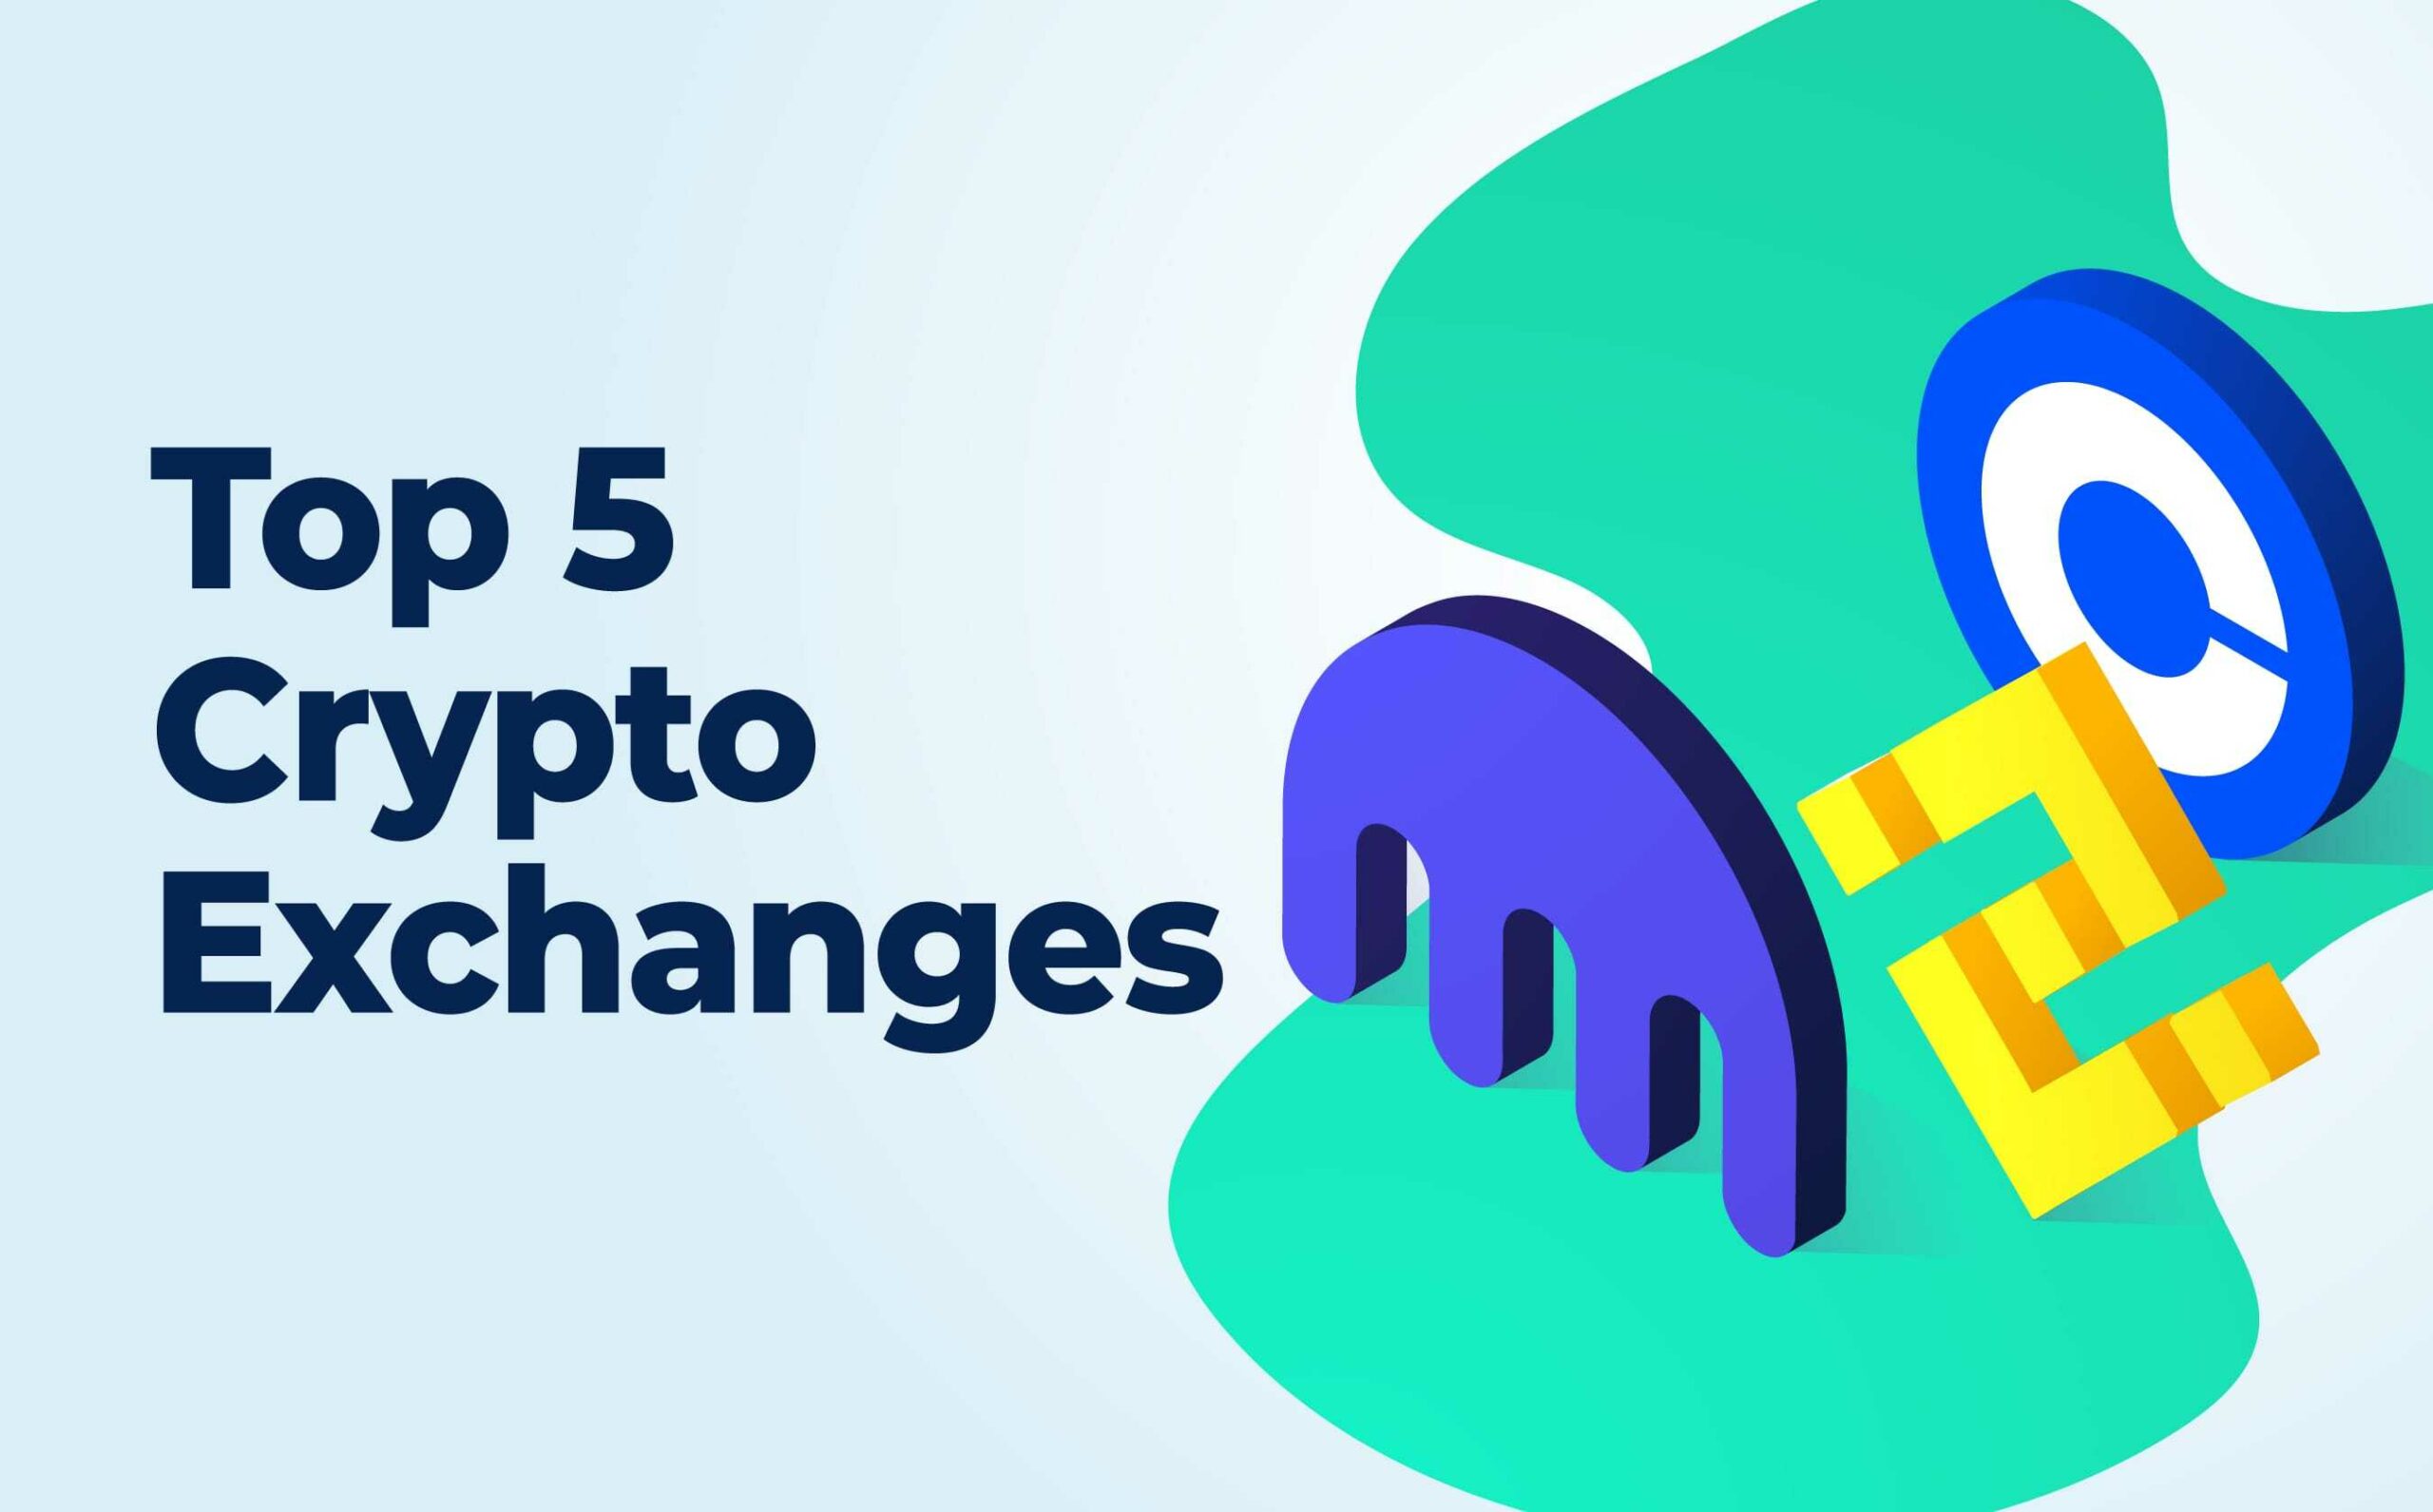 Top 5 Crypto Exchanges to Earn Referral Income?